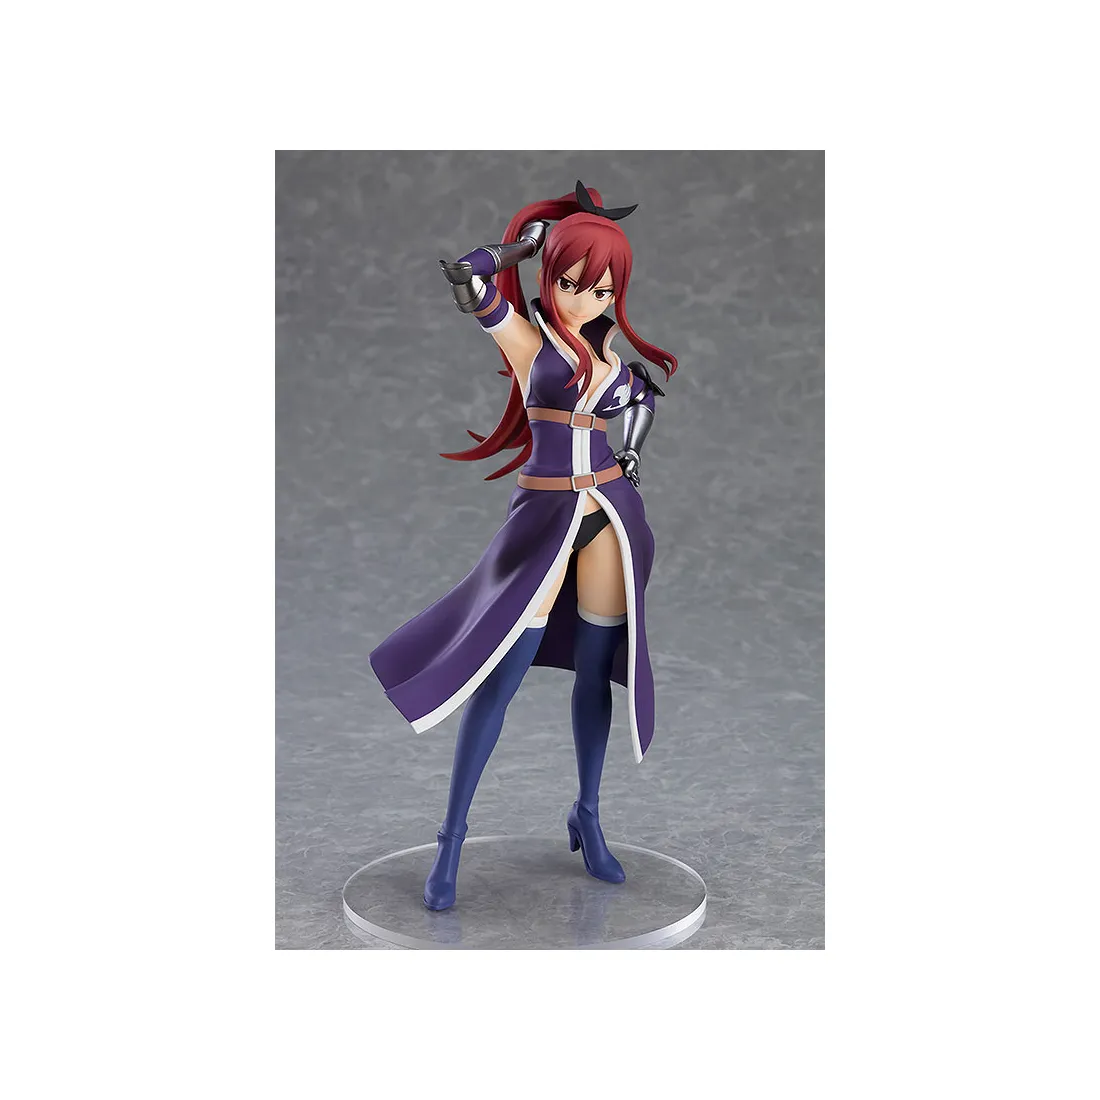 POP UP PARADE FAIRY TAIL Erza Scarlet Grand Magic Royale Ver